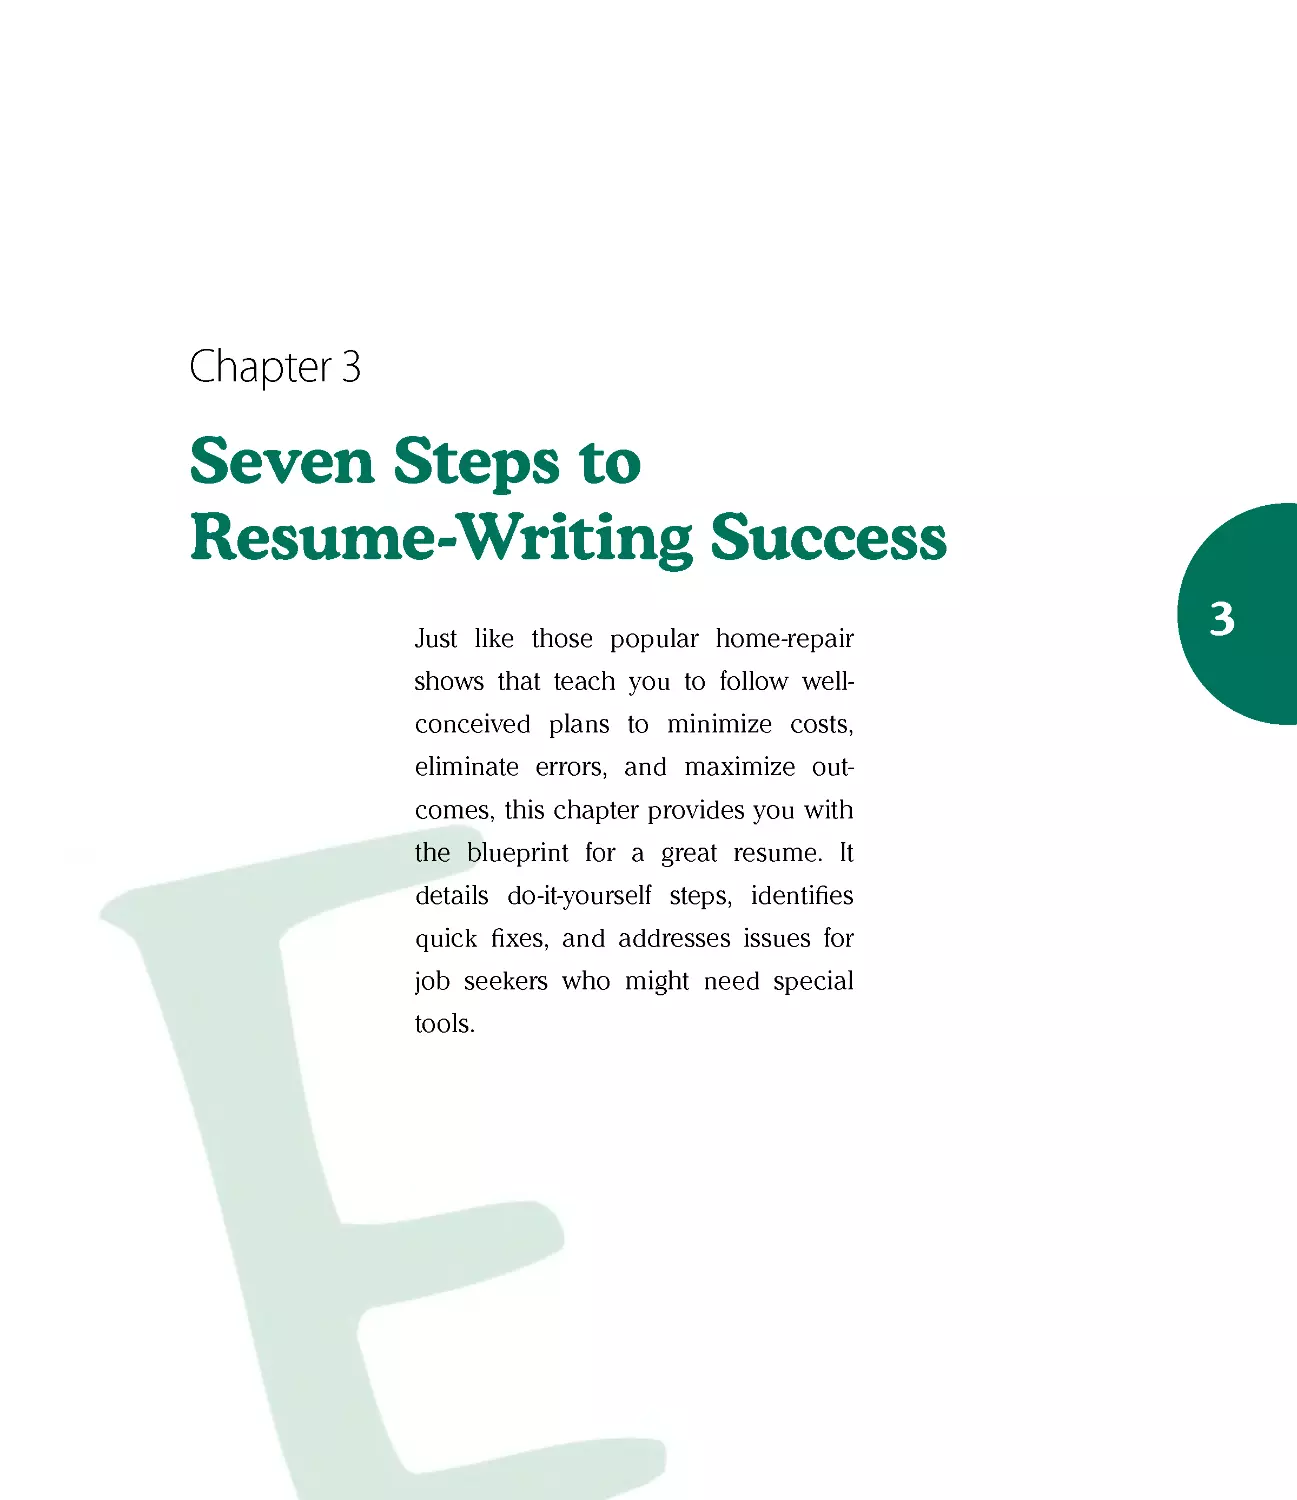 Chapter 3: Seven Steps to Resume-Writing Success